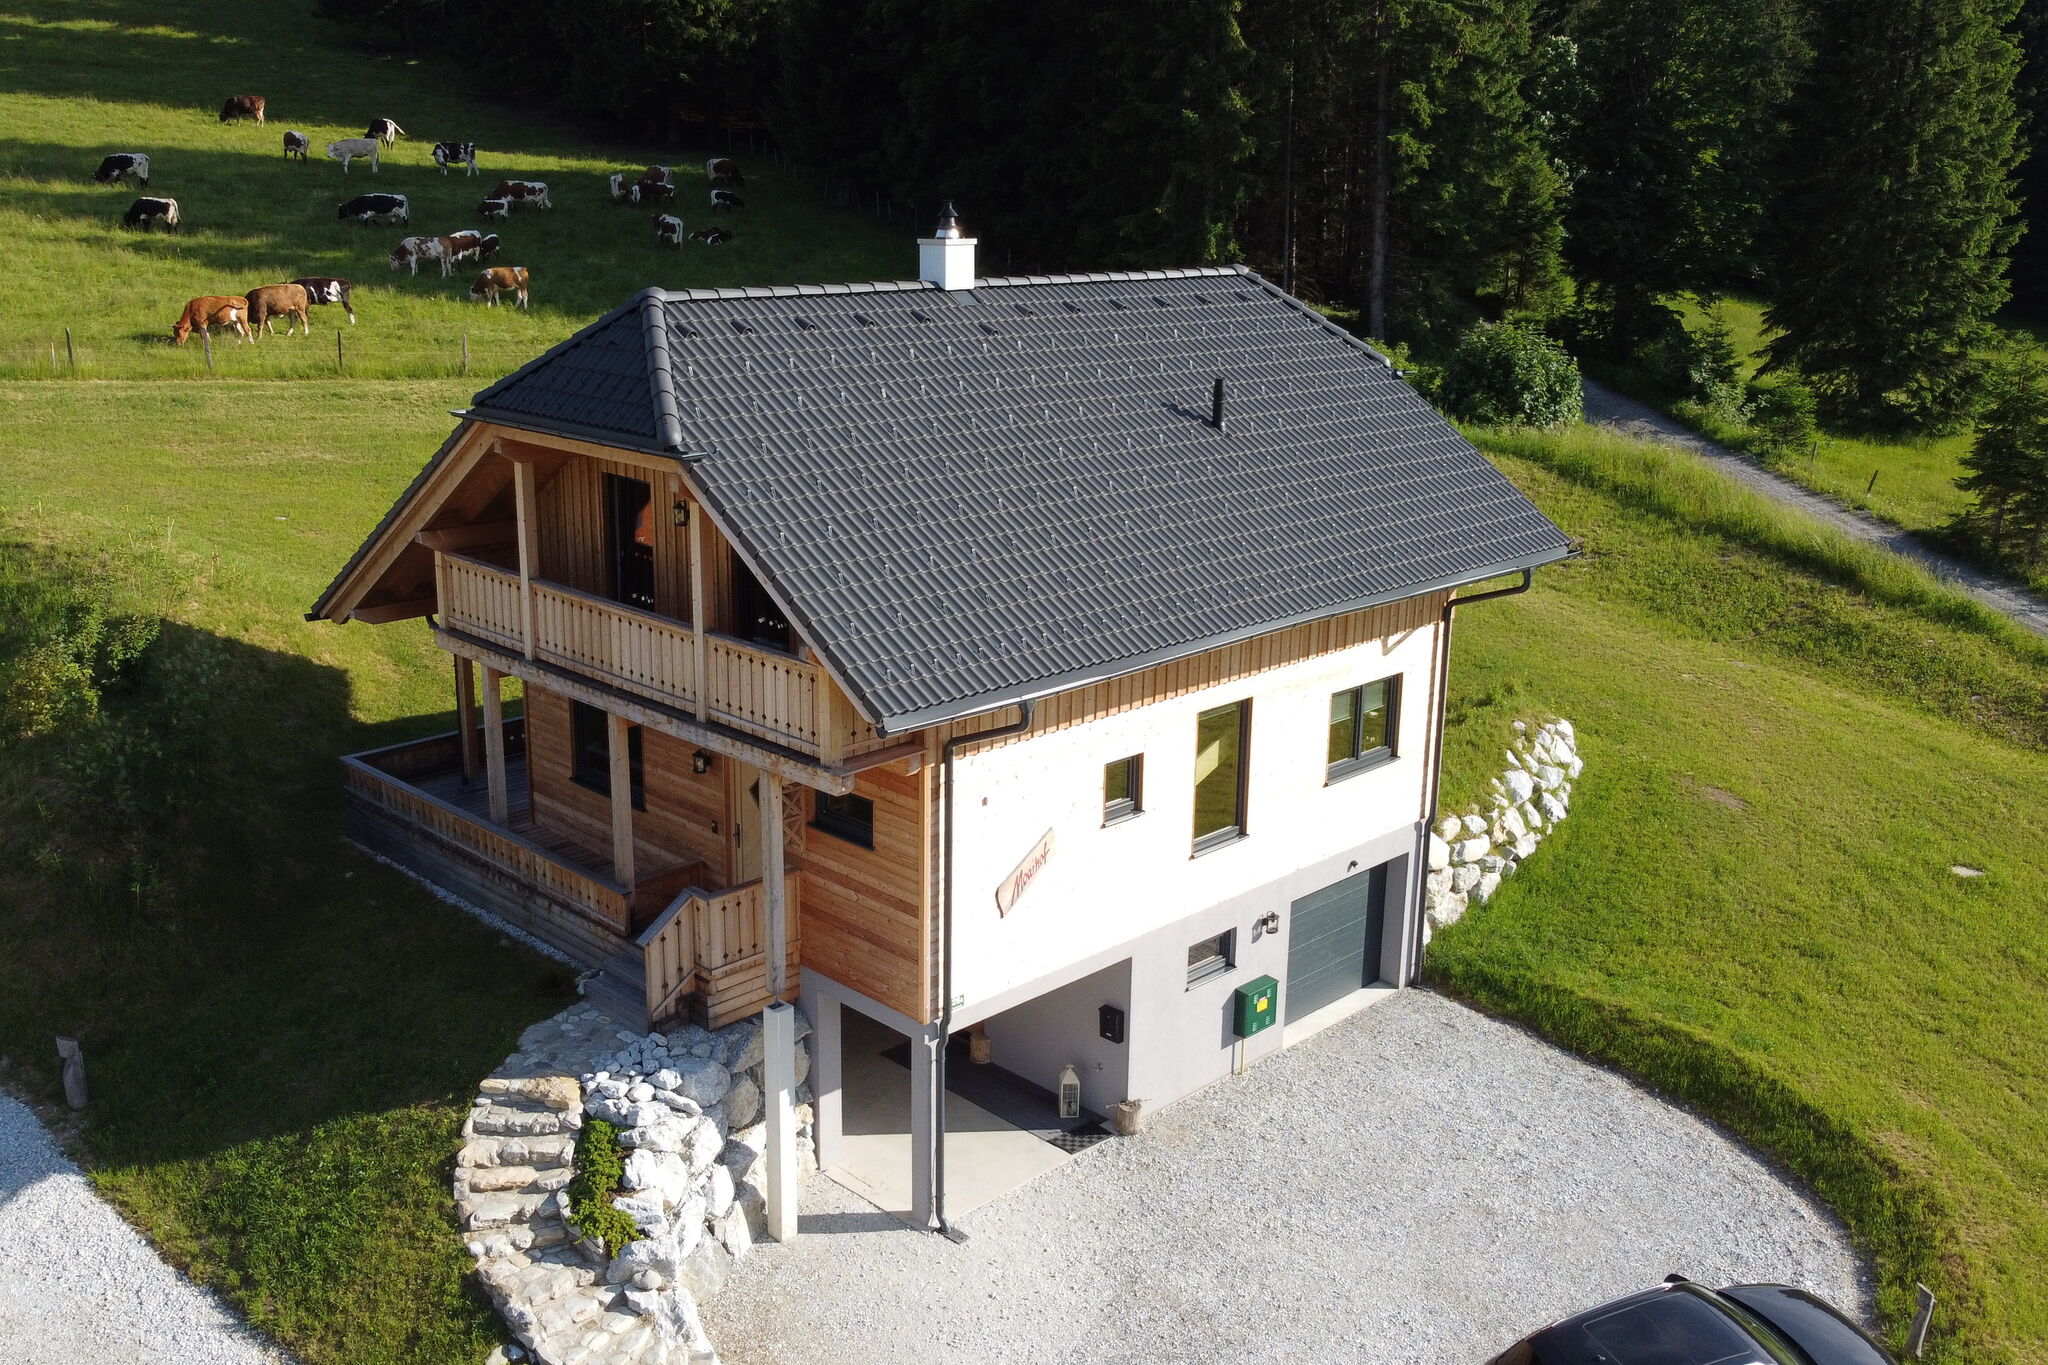 Chalet in Hohentauern with ski-in/ski-out